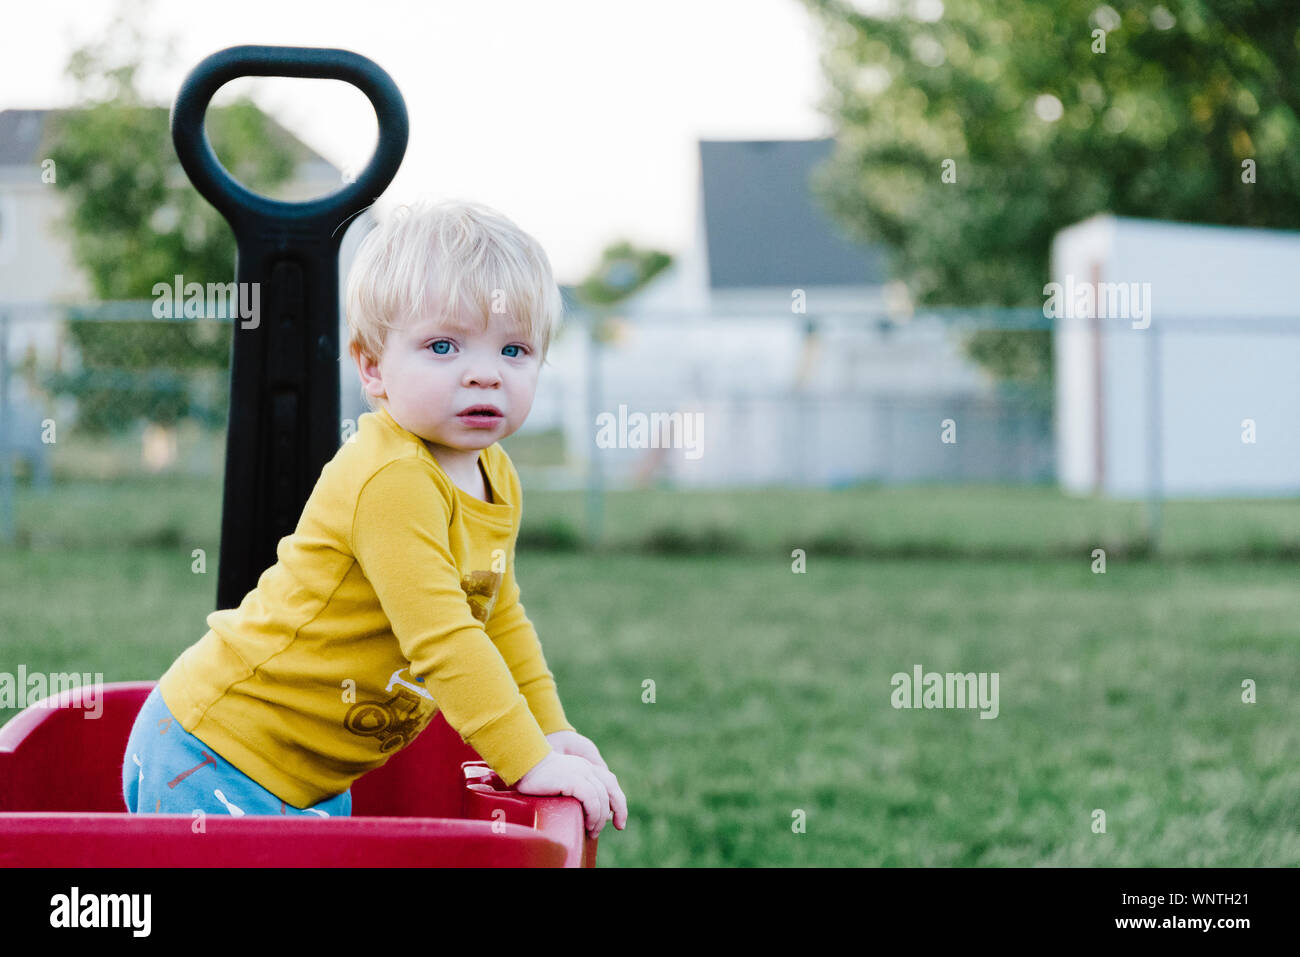 Toddler boy standing in a red wagon wearing a yellow shirt. Stock Photo